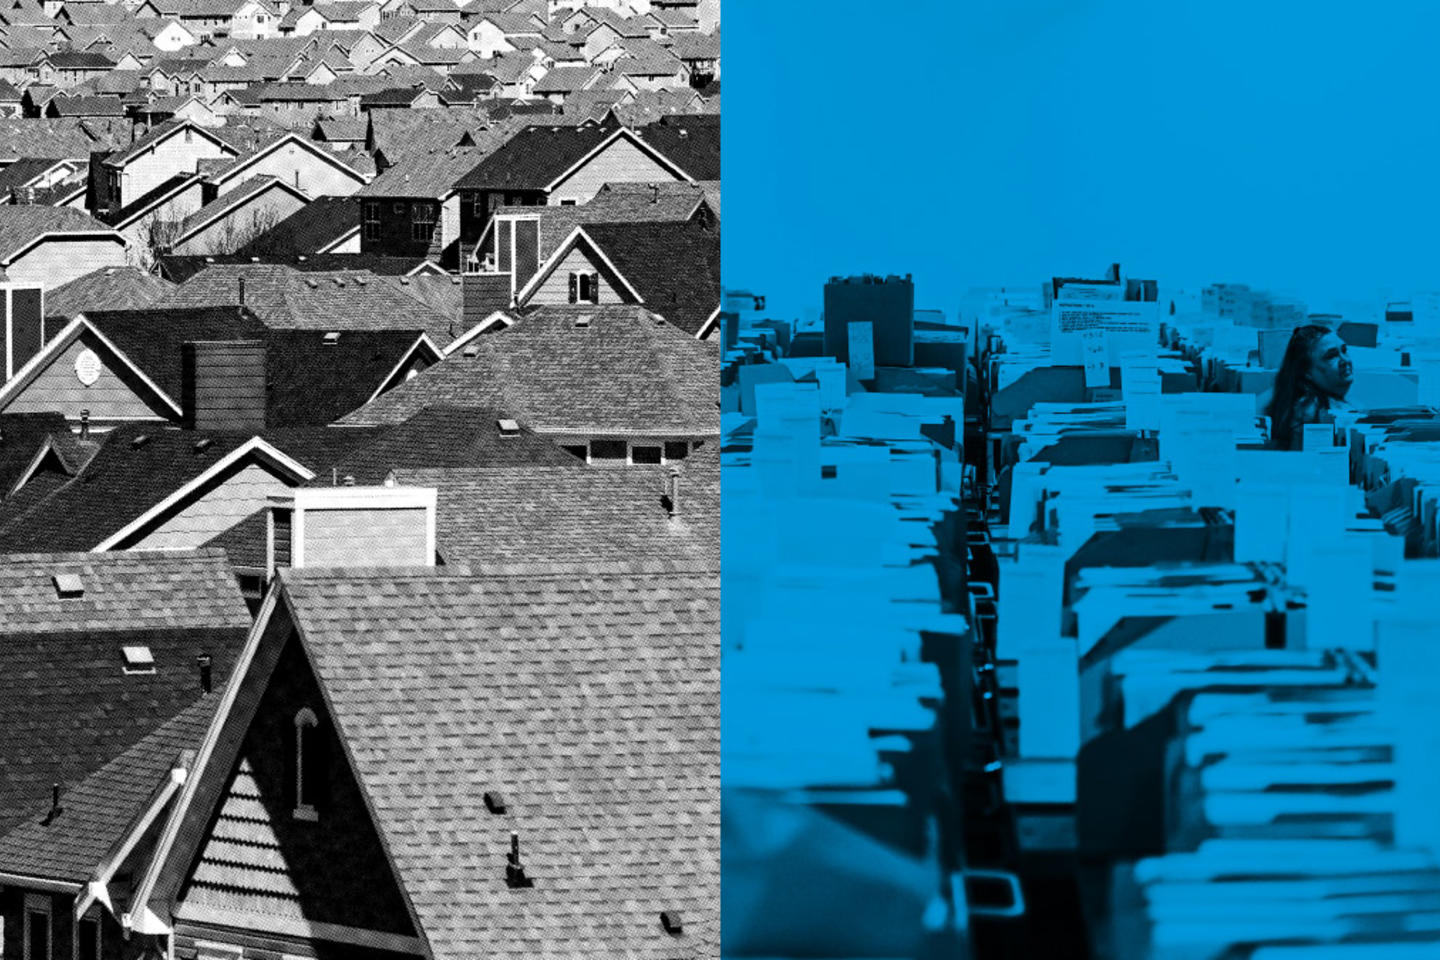 A split screen view of a neighborhood (left) and inside an office (right).